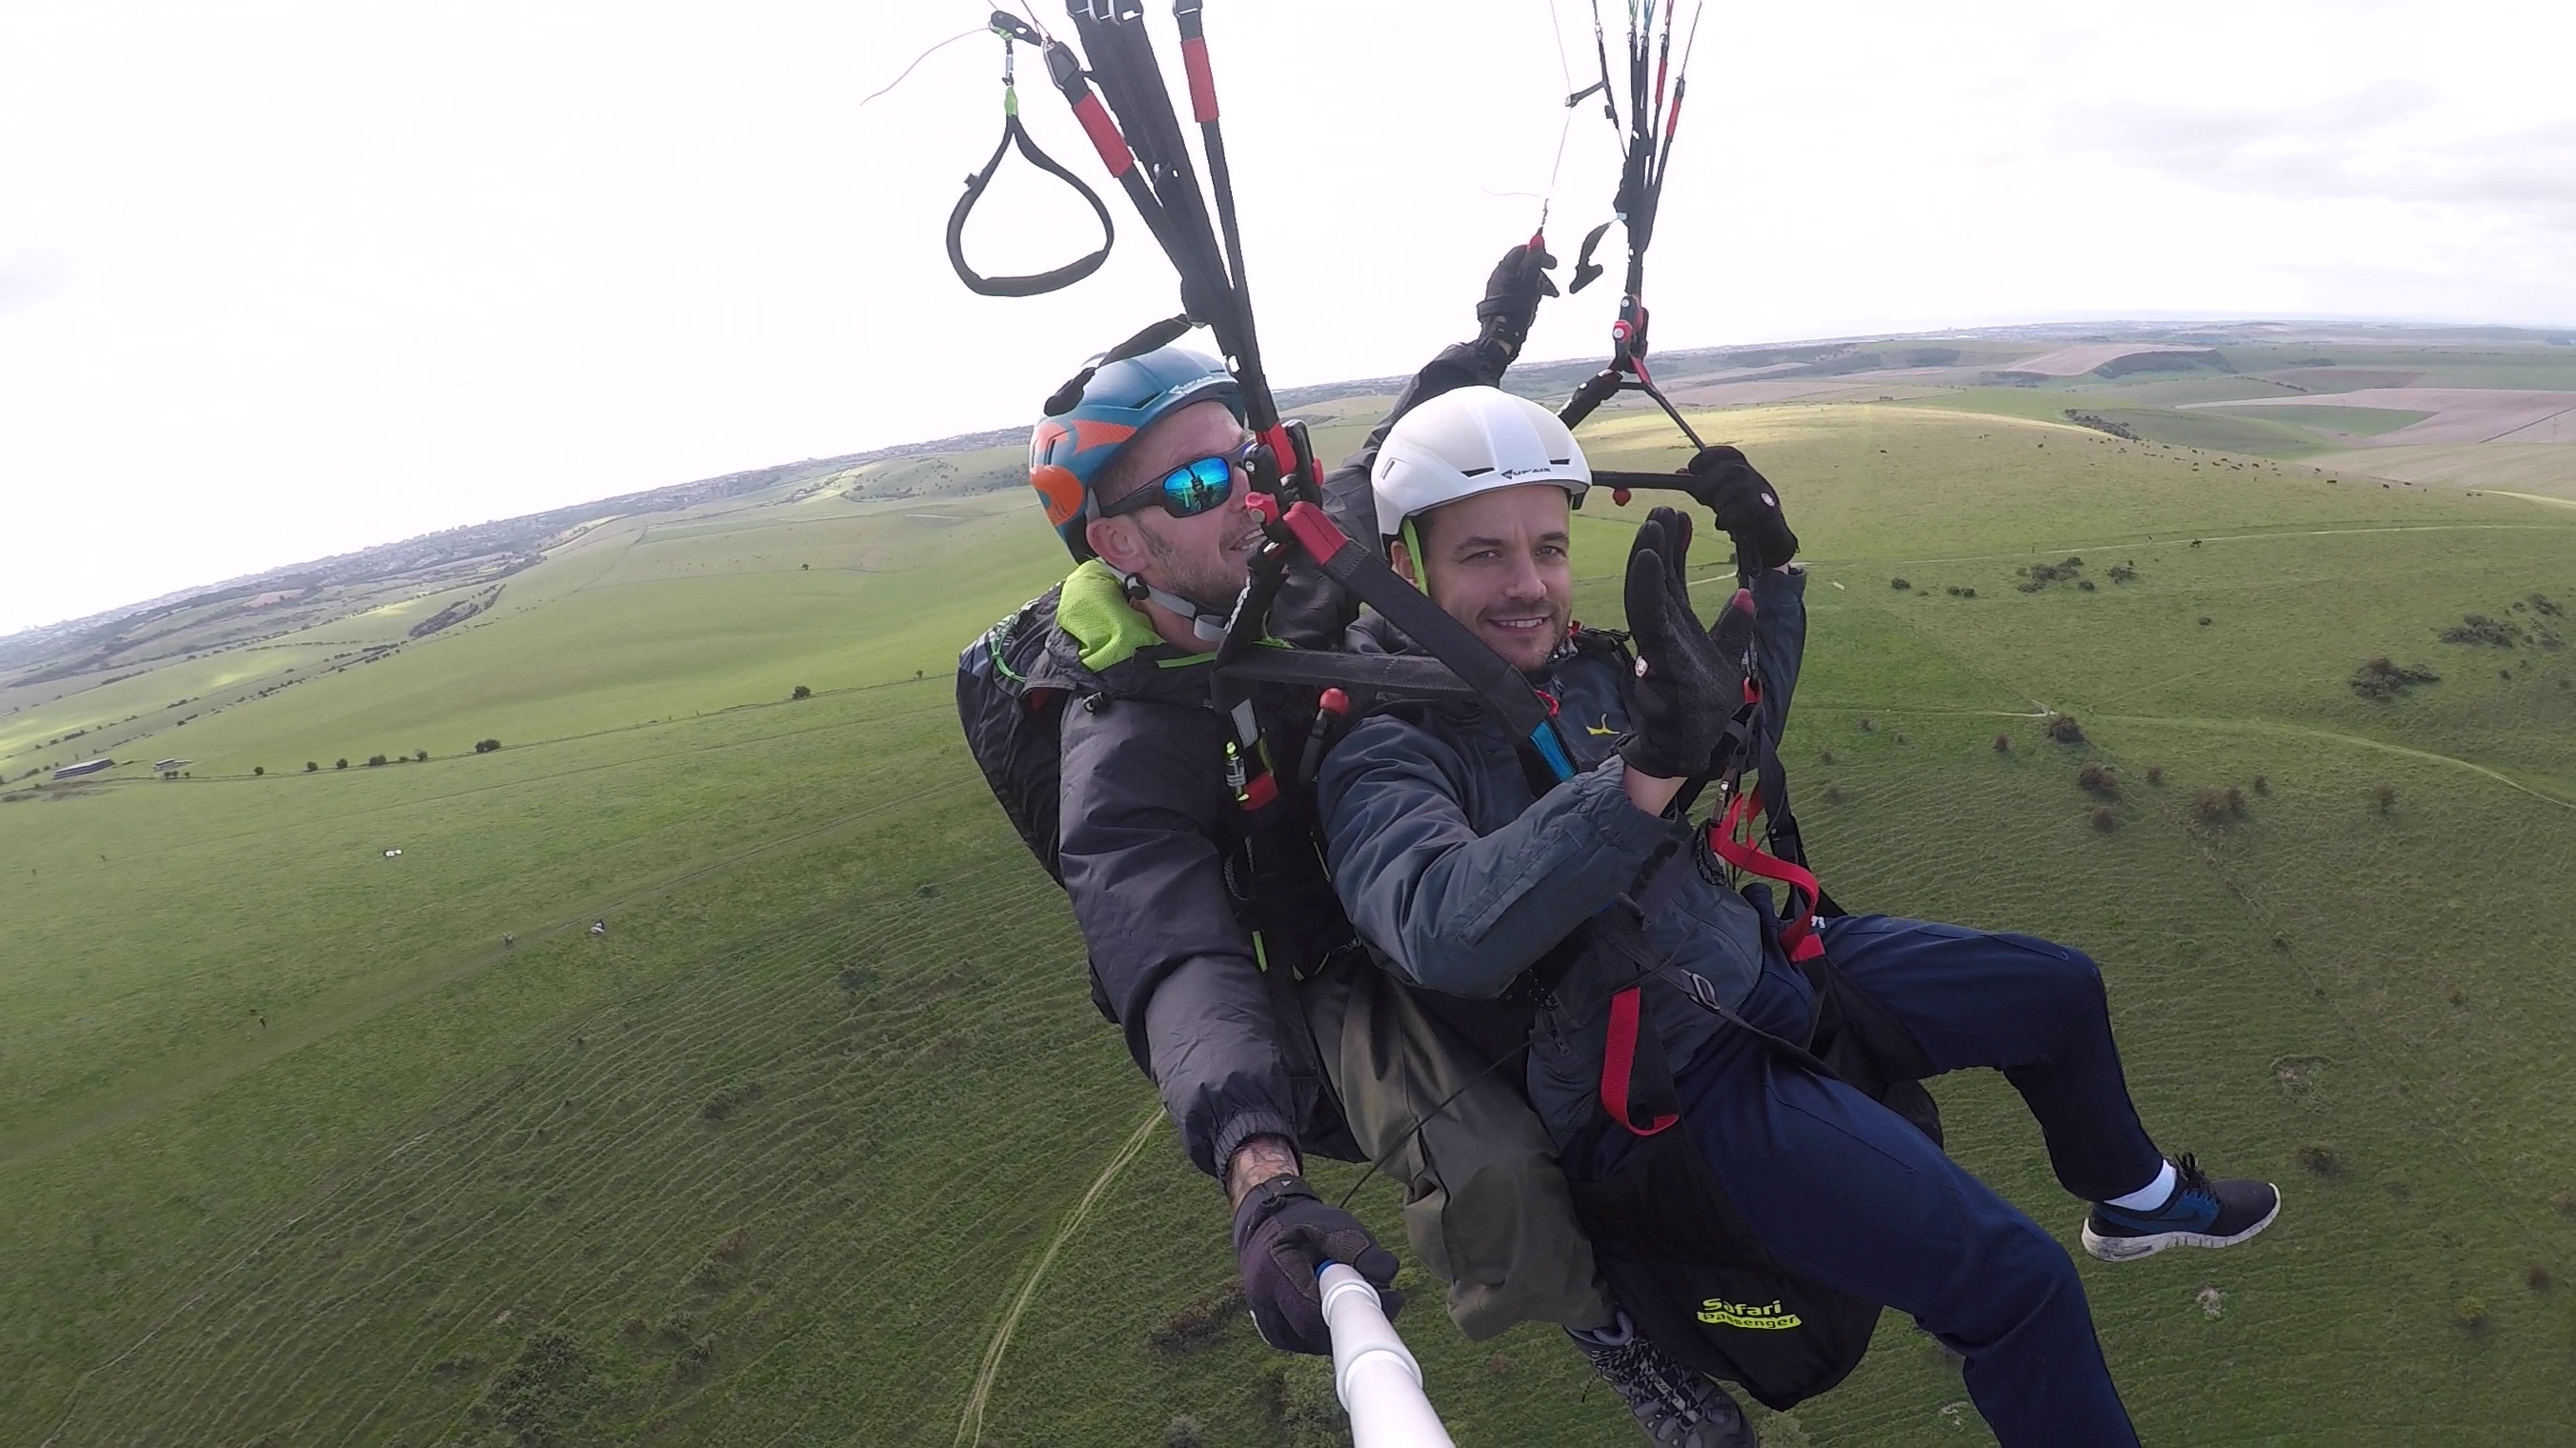 Paragliding experiences as a gift with Mile High Paragliding